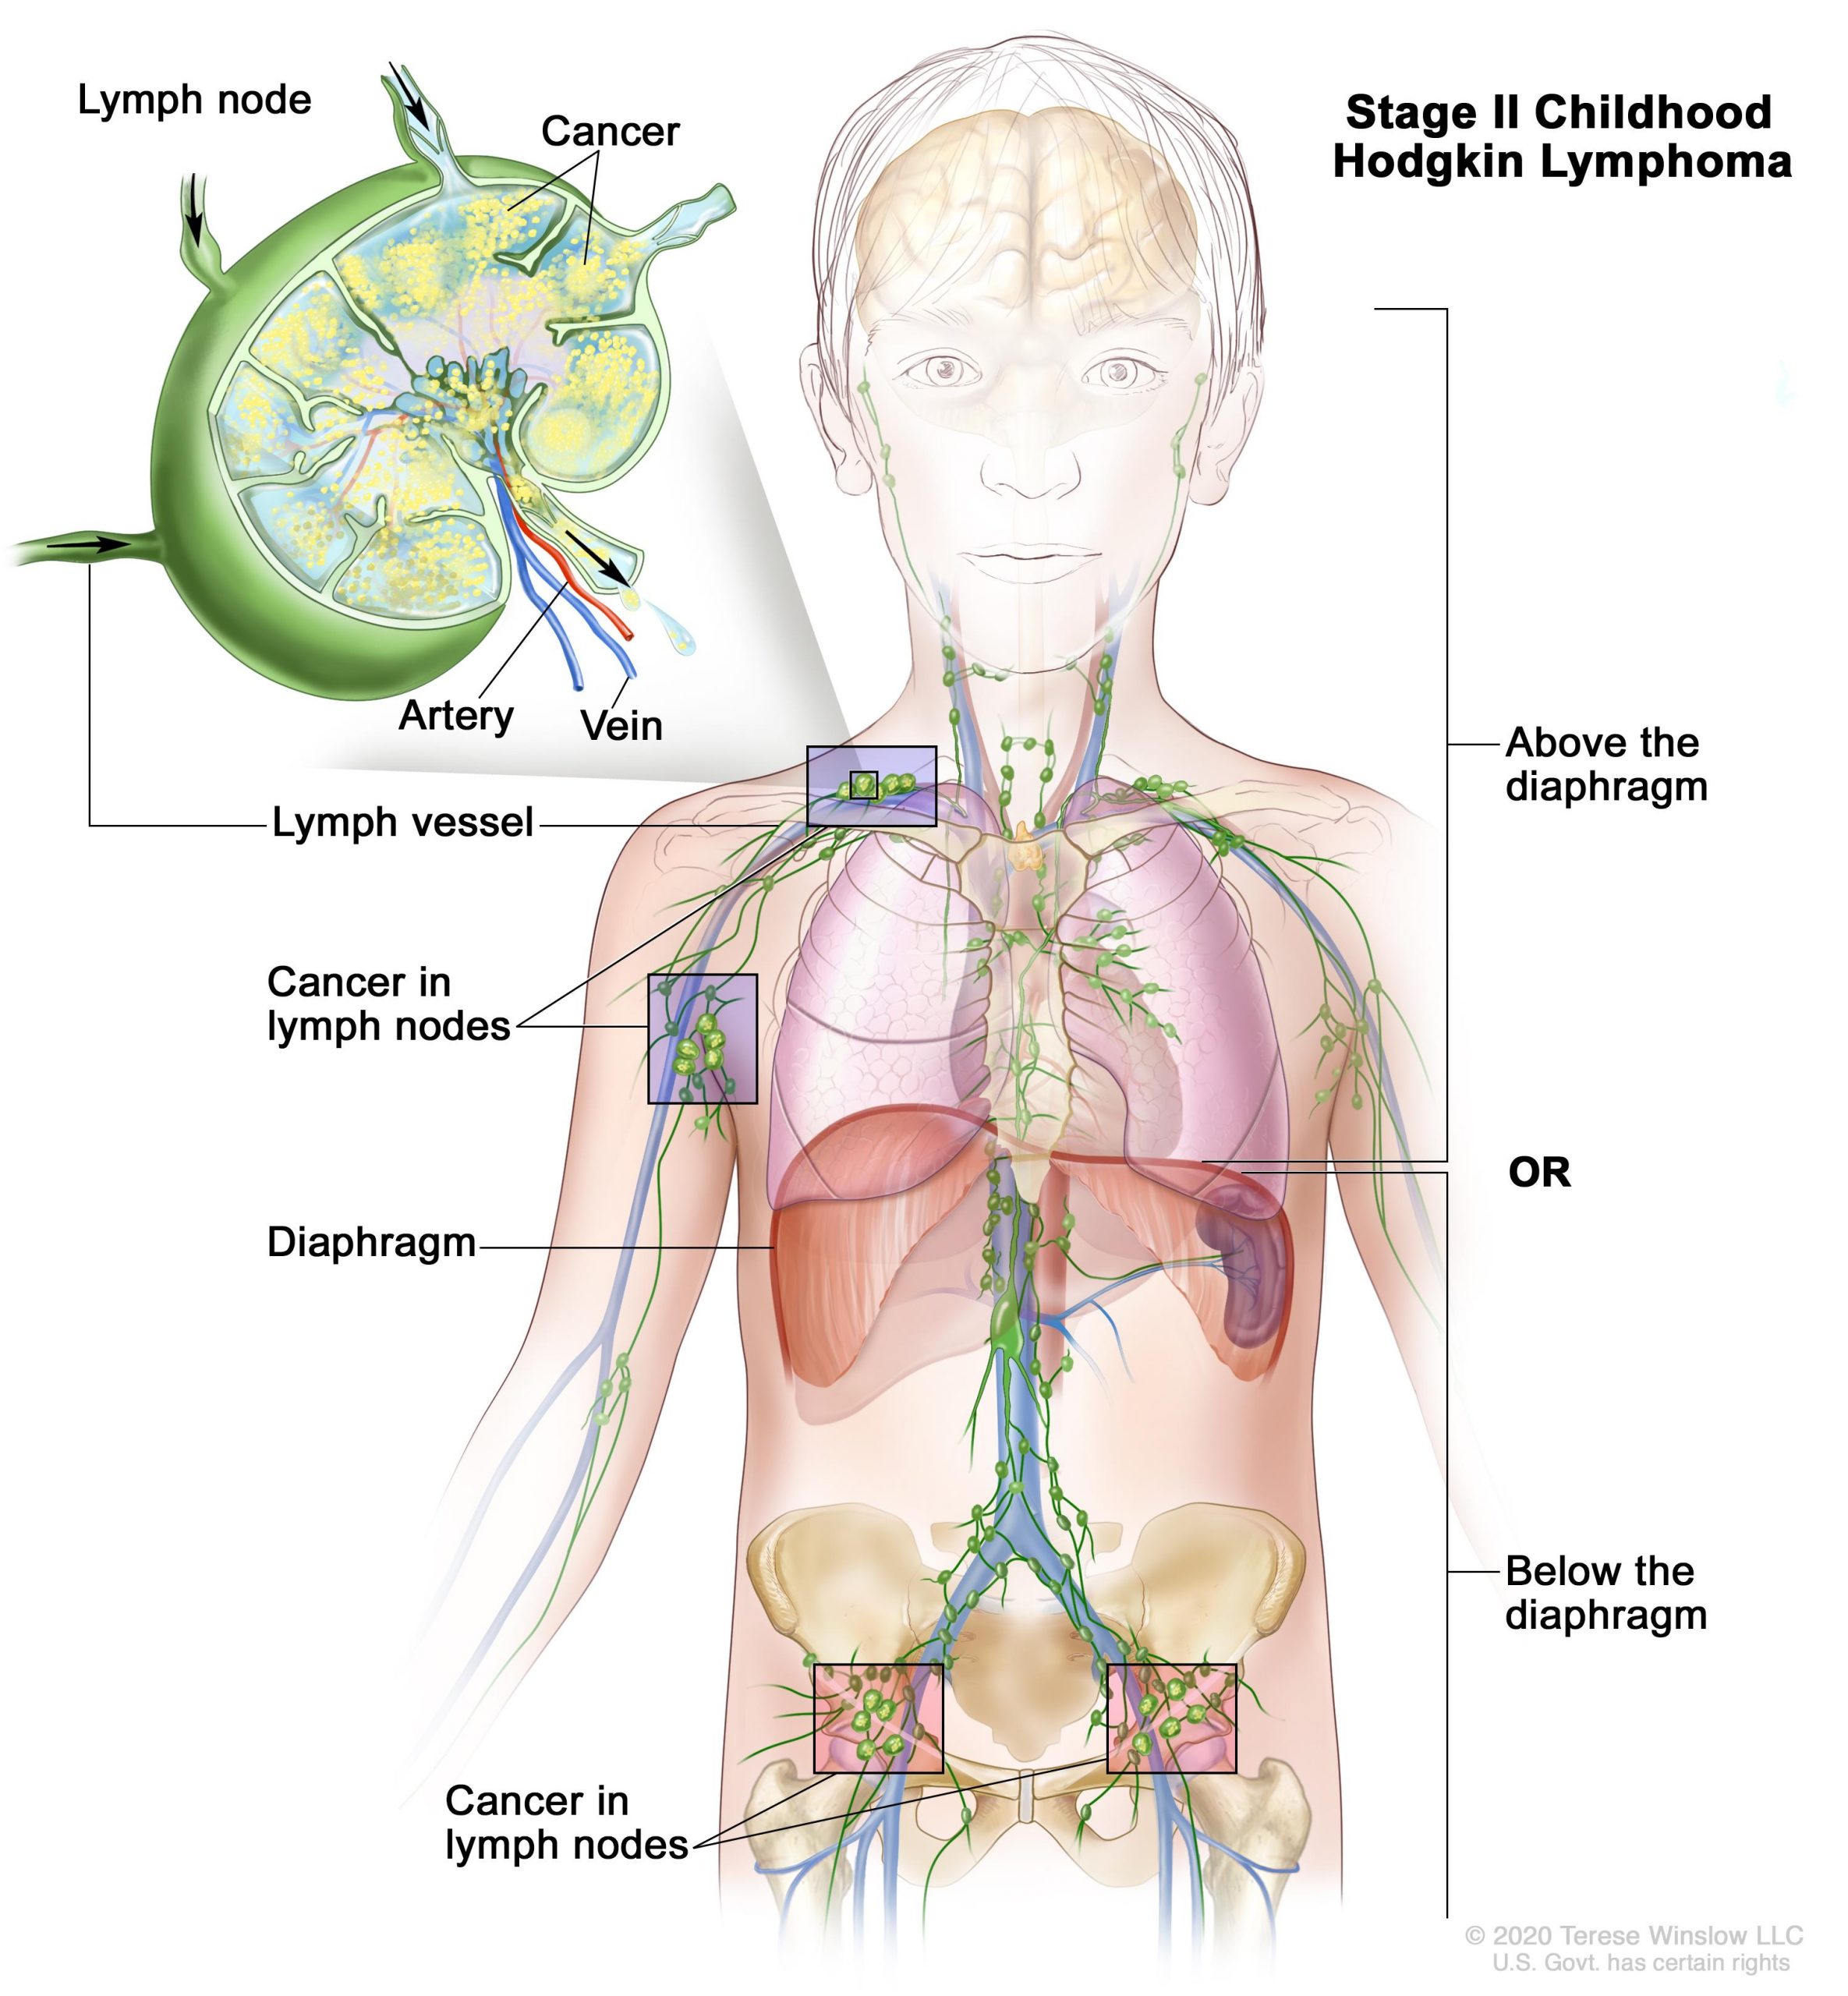 What is Hodgkin’s Lymphoma (HL)?